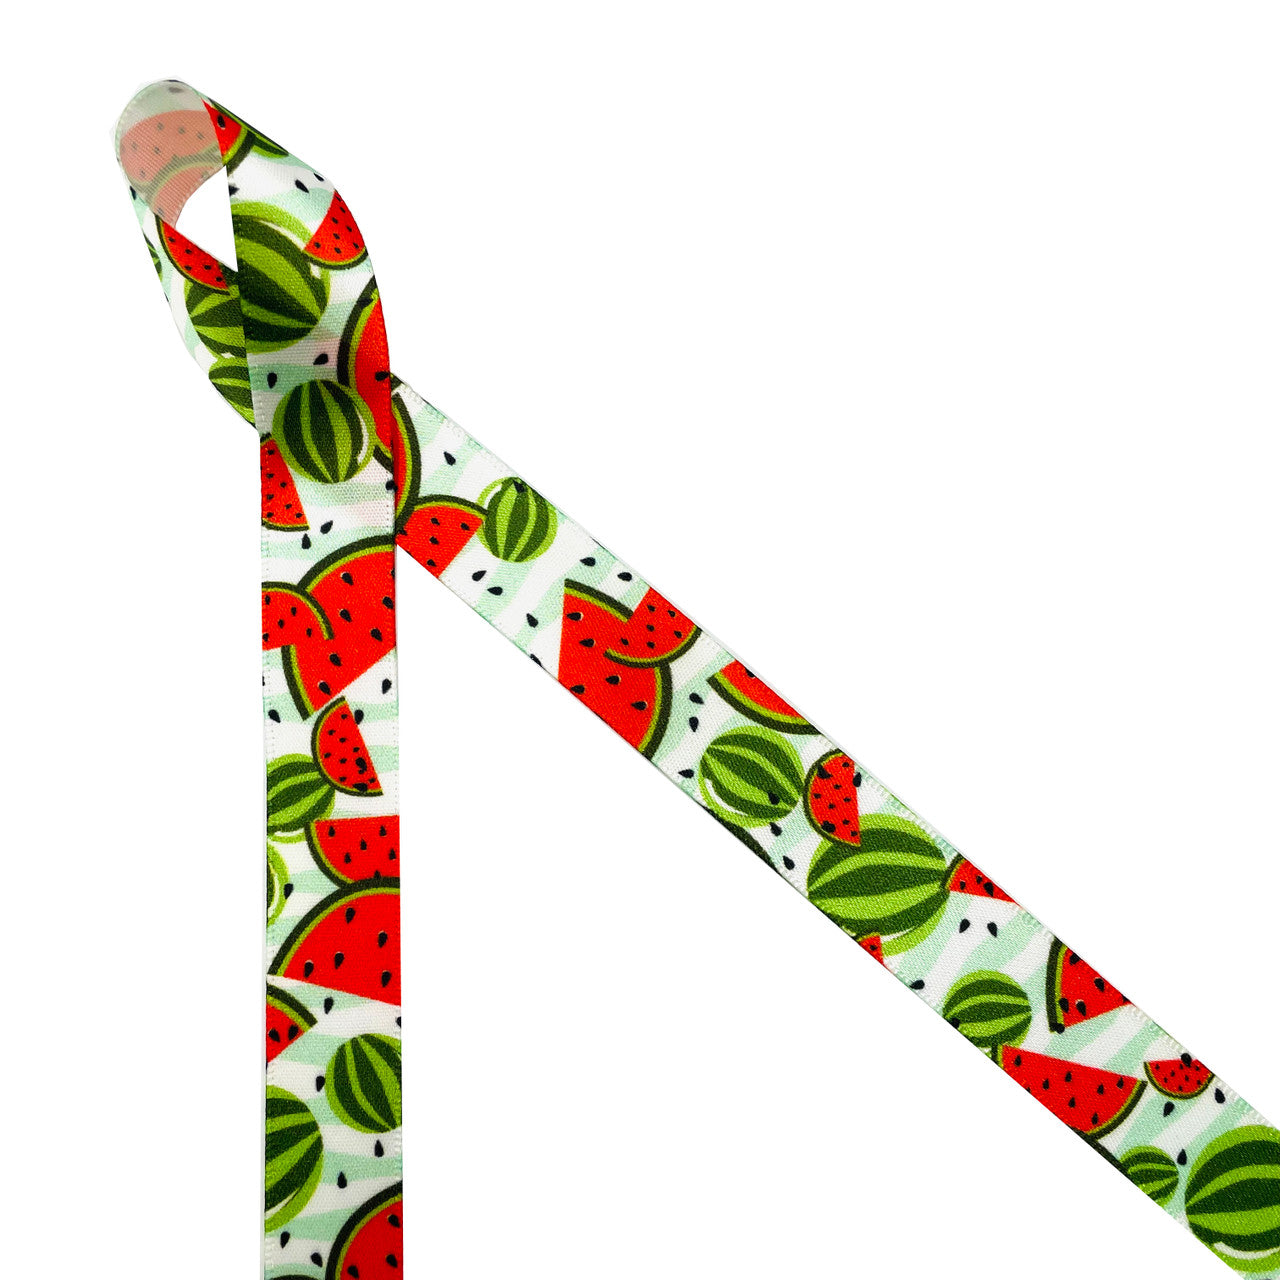 Watermelon ribbon red slices and whole melons with black seeds tossed on a green and white striped background printed on 5/8" white single face satin is a fun Summer themed ribbon. This is a great ribbon for barbecues, Summer parties, pool parties, and Fourth of July for party decor, party favors, gift wrap, gift baskets, cookies, cake pops and sweets tables! Use this ribbons for crafts, hair bows, headbands, sewing and quilting projects! All our ribbon is designed and printed in the USA